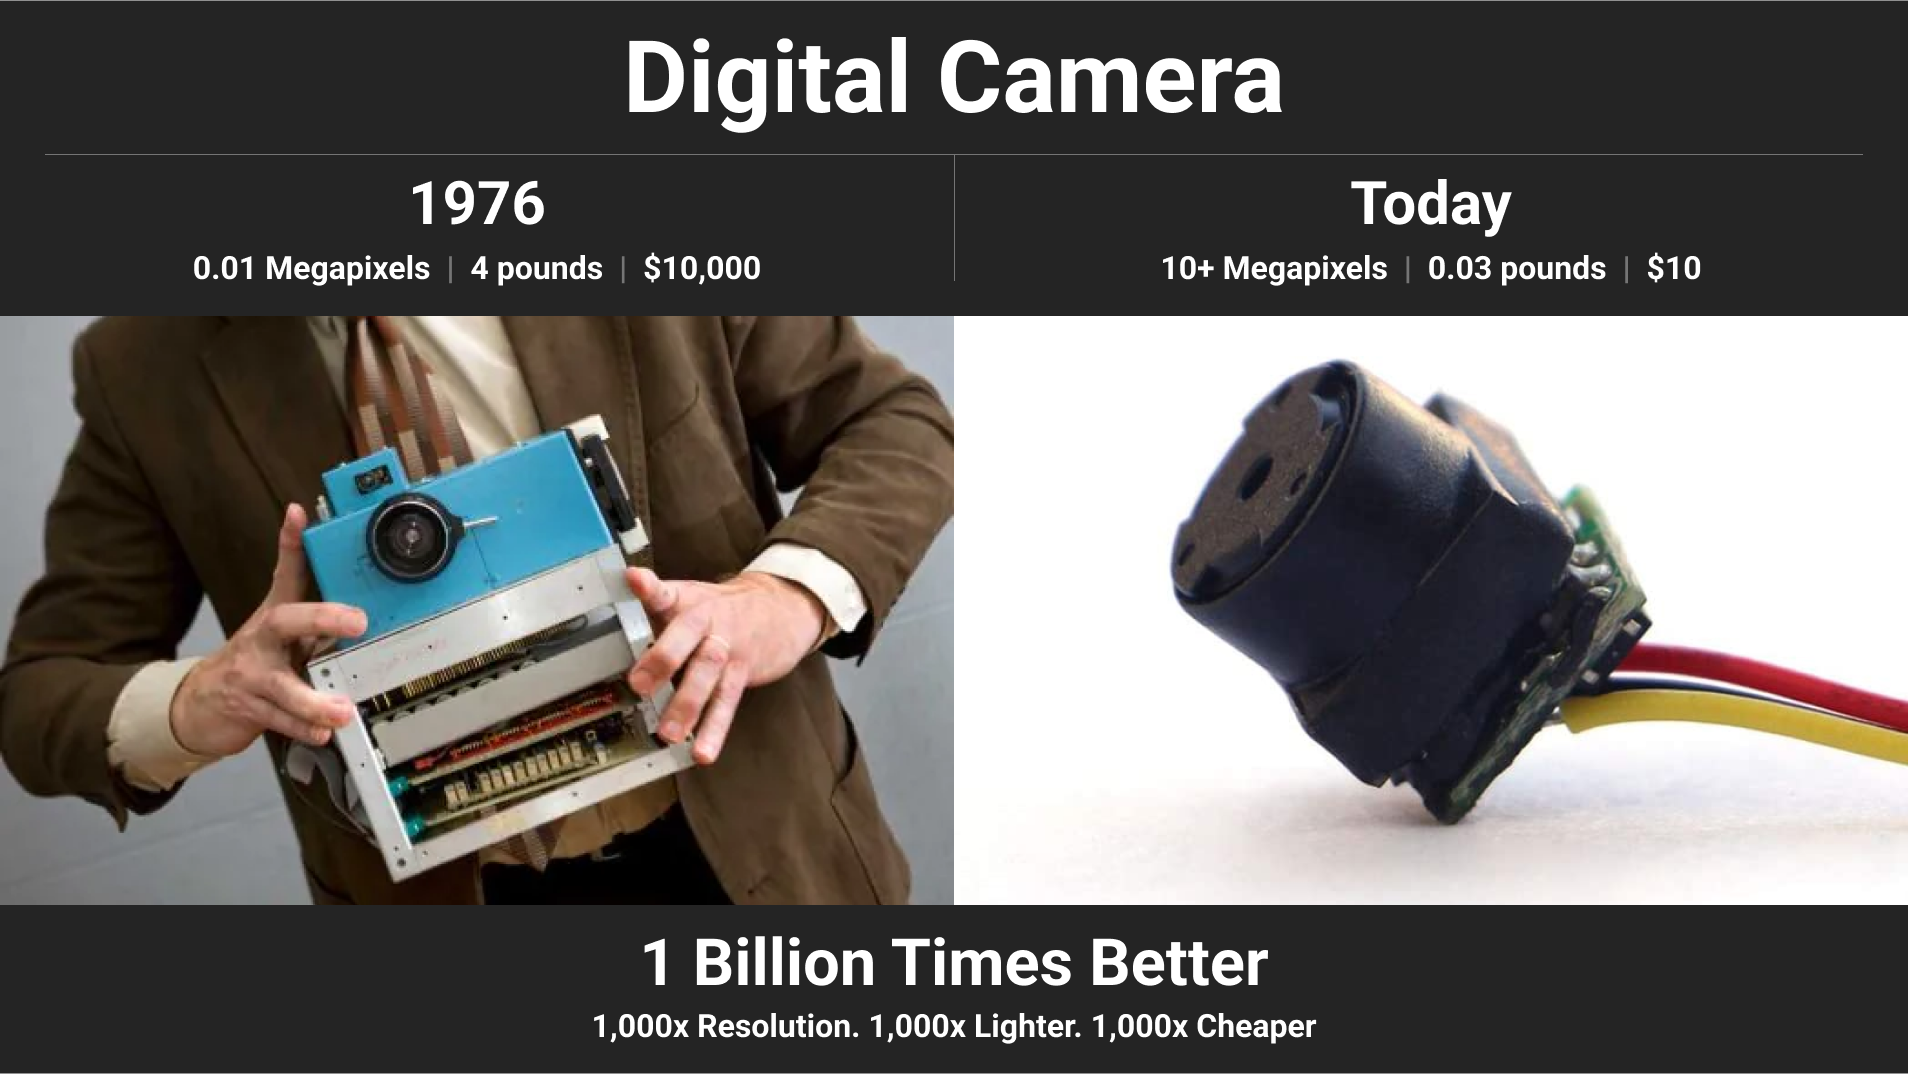 Image of a digital camera in 1976 and today.